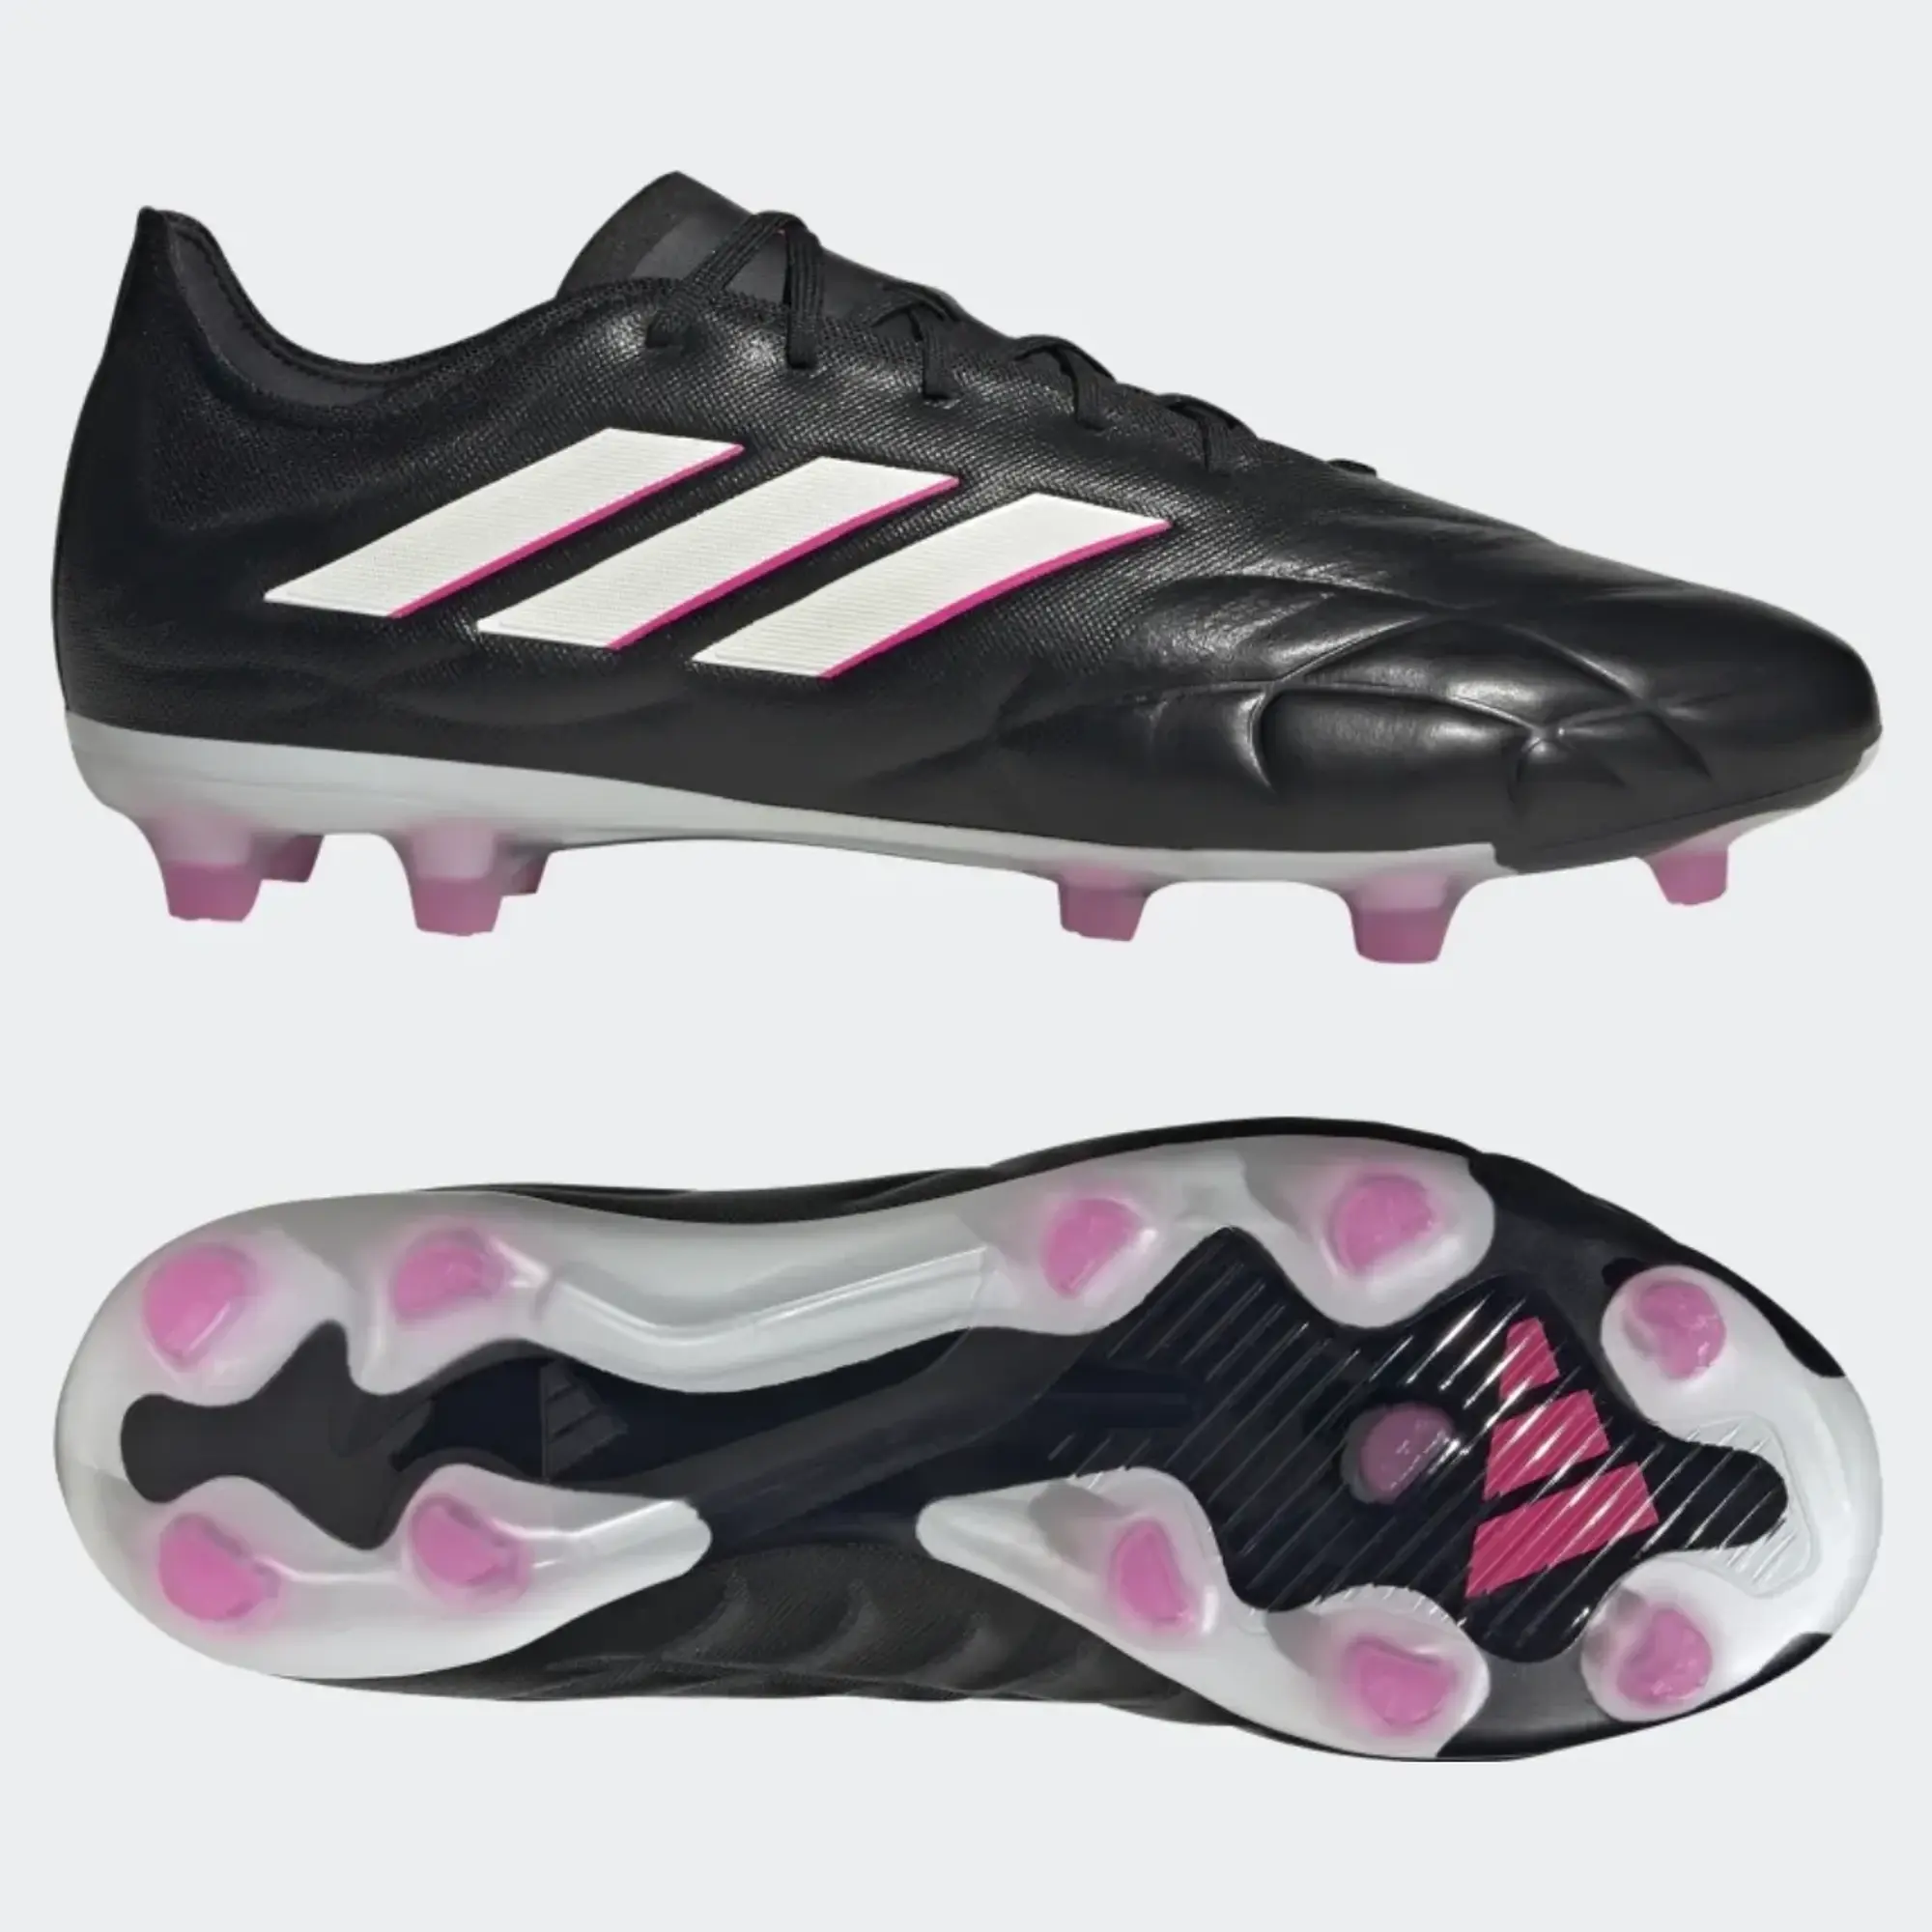 adidas Copa Pure.2 Firm Ground Football Boots Mens - Black